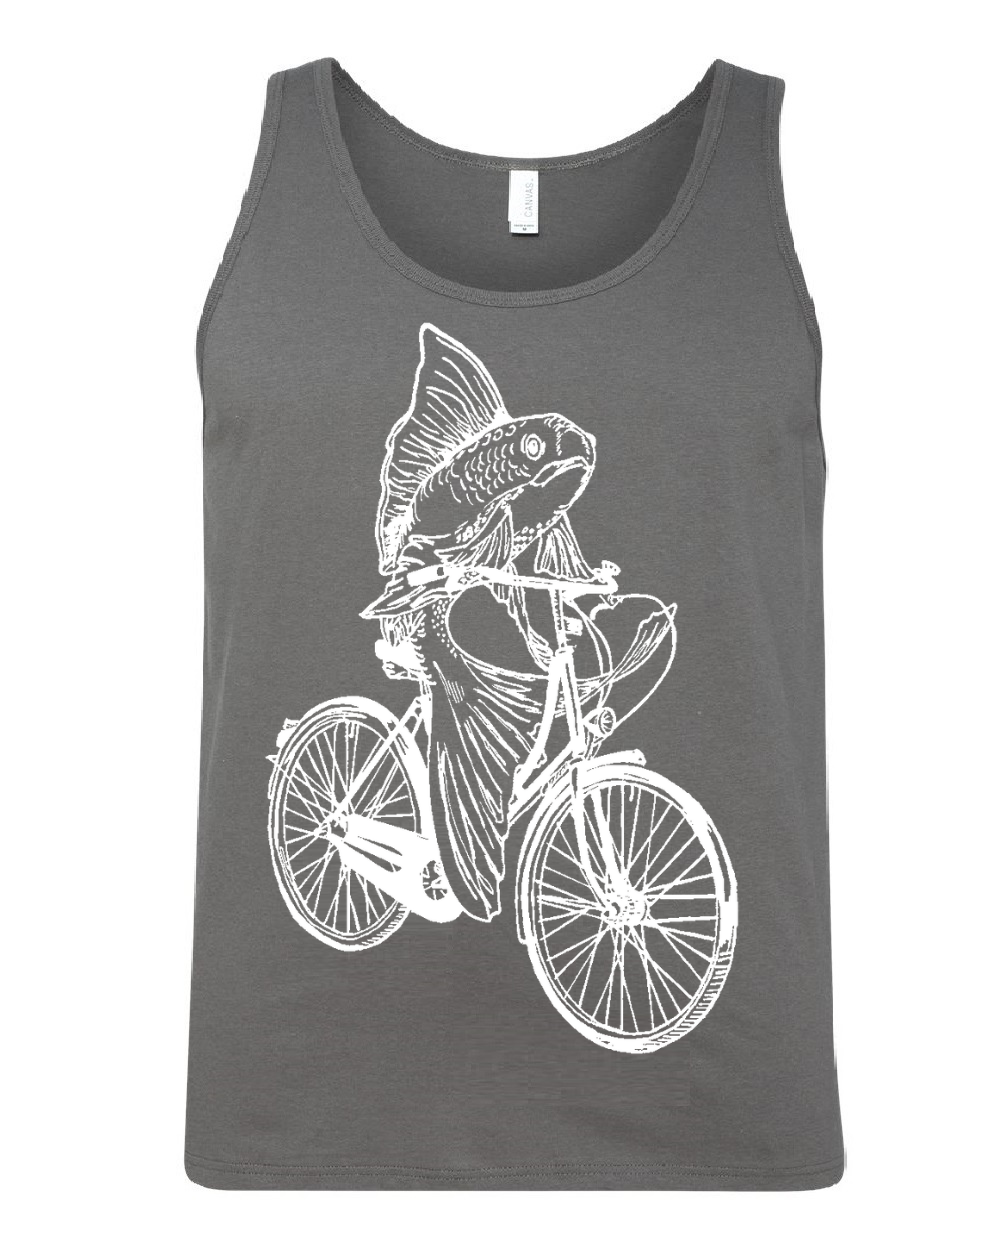 Fish on a Bicycle Unisex Tank Top